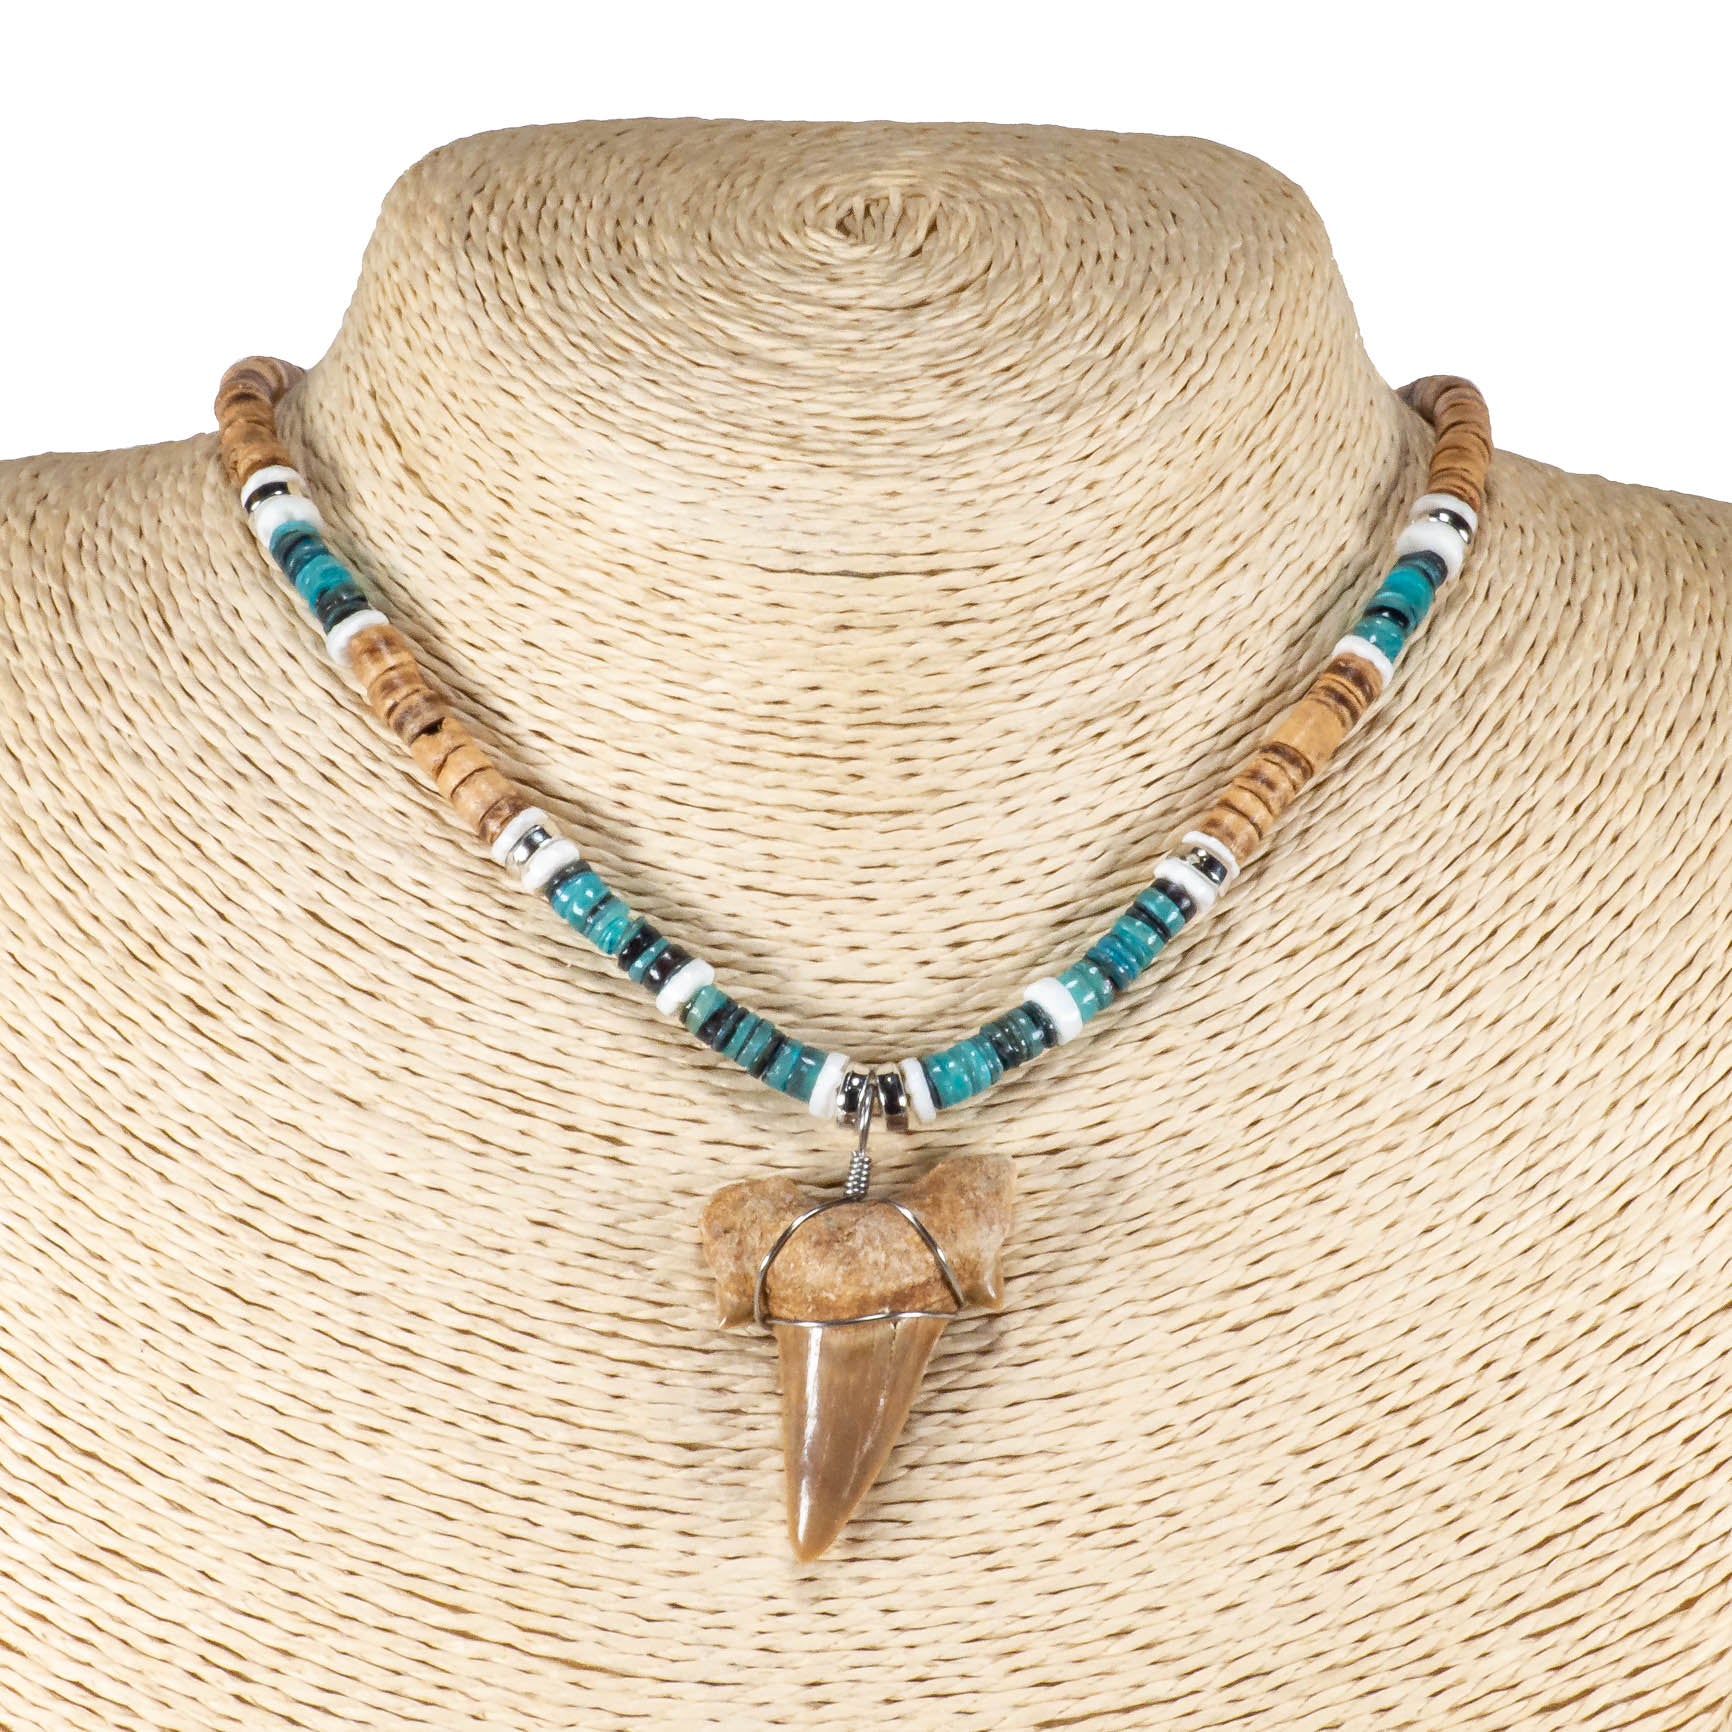 1¼"+ Shark Tooth Pendant on Tiger Coconut & Green Shell Beads Necklace